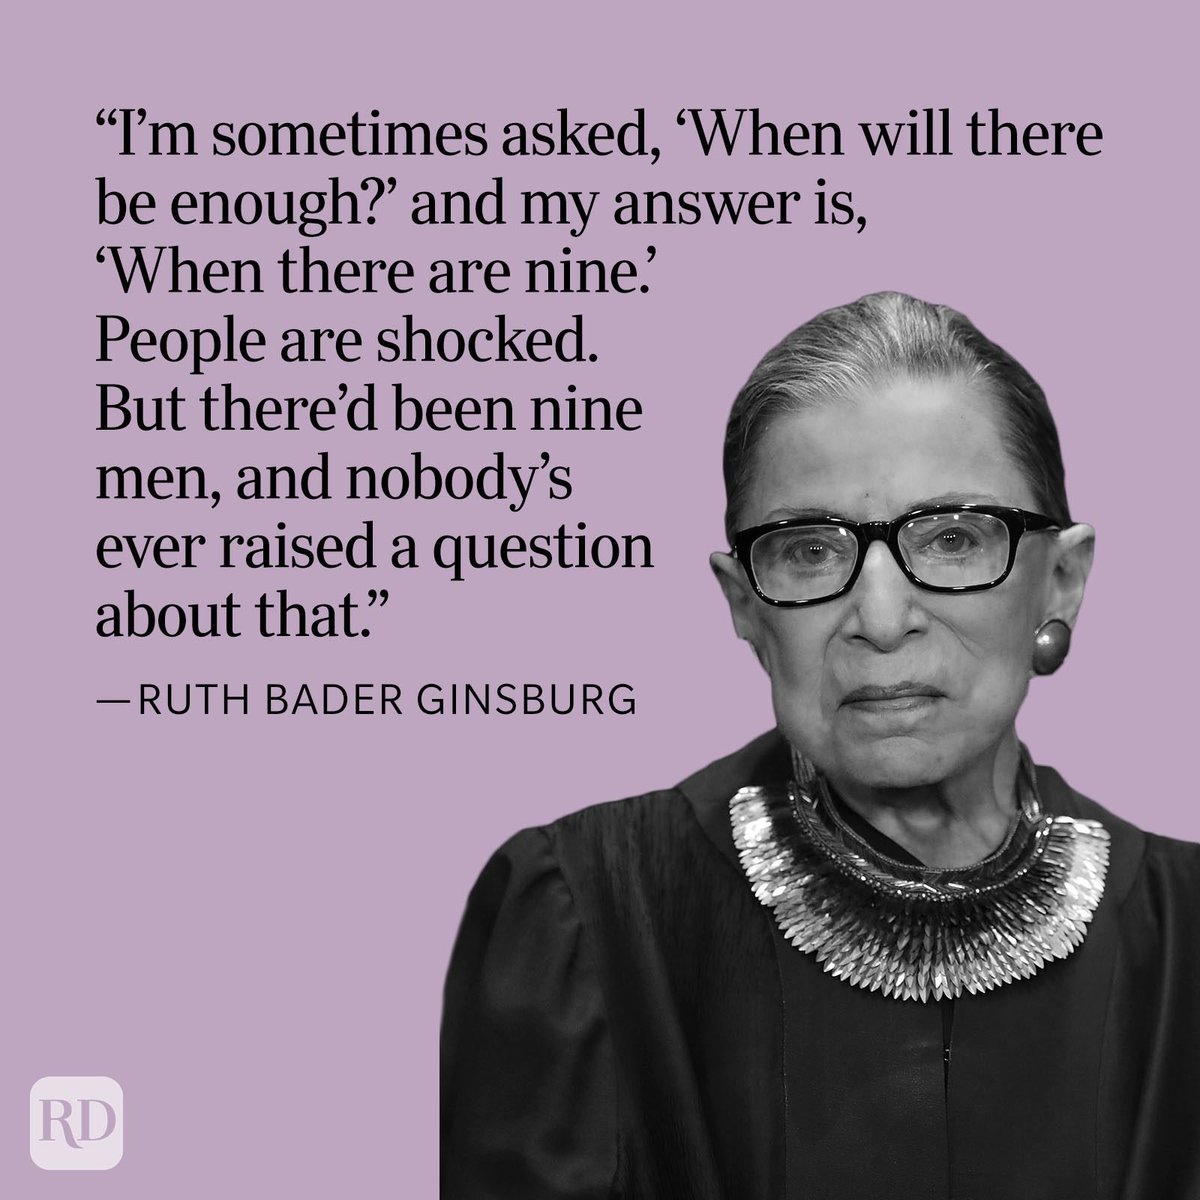 #InternationalWomensDay2023 I'm sometimes asked, 'when will there be enough?' and my answer is, 'When there are nine.' People are shocked. But there'd been nine men, and nobody's ever raised a question about that. #RuthBaderGinsberg #SheInspiresMe #EmbraceEquity